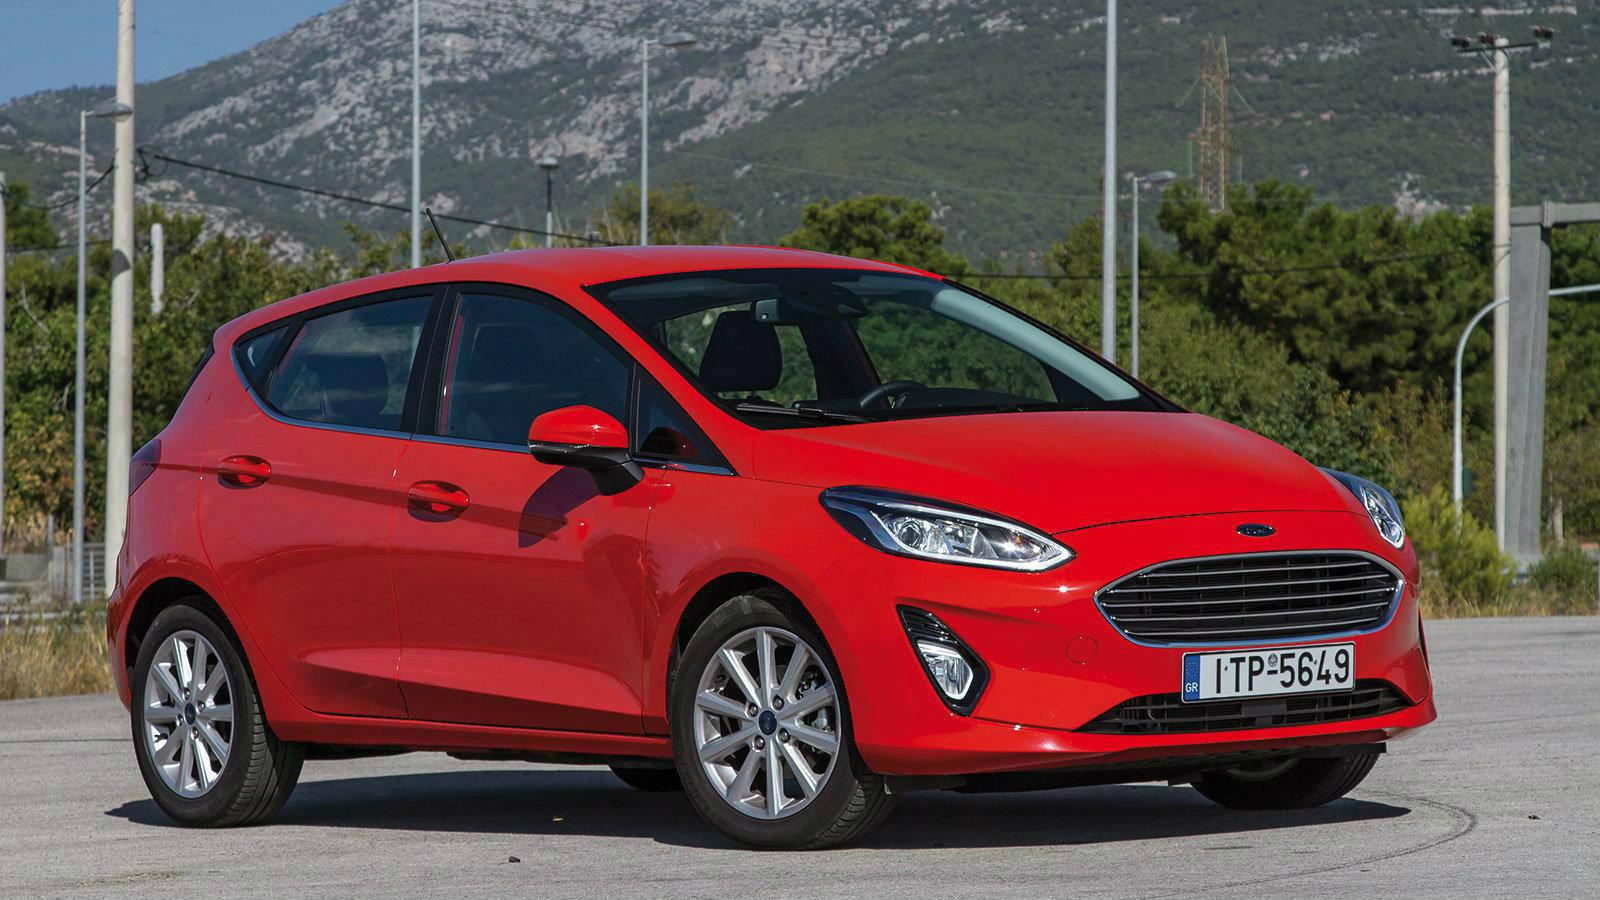 Ford Fiesta 1.0 EcoBoost 125 PS